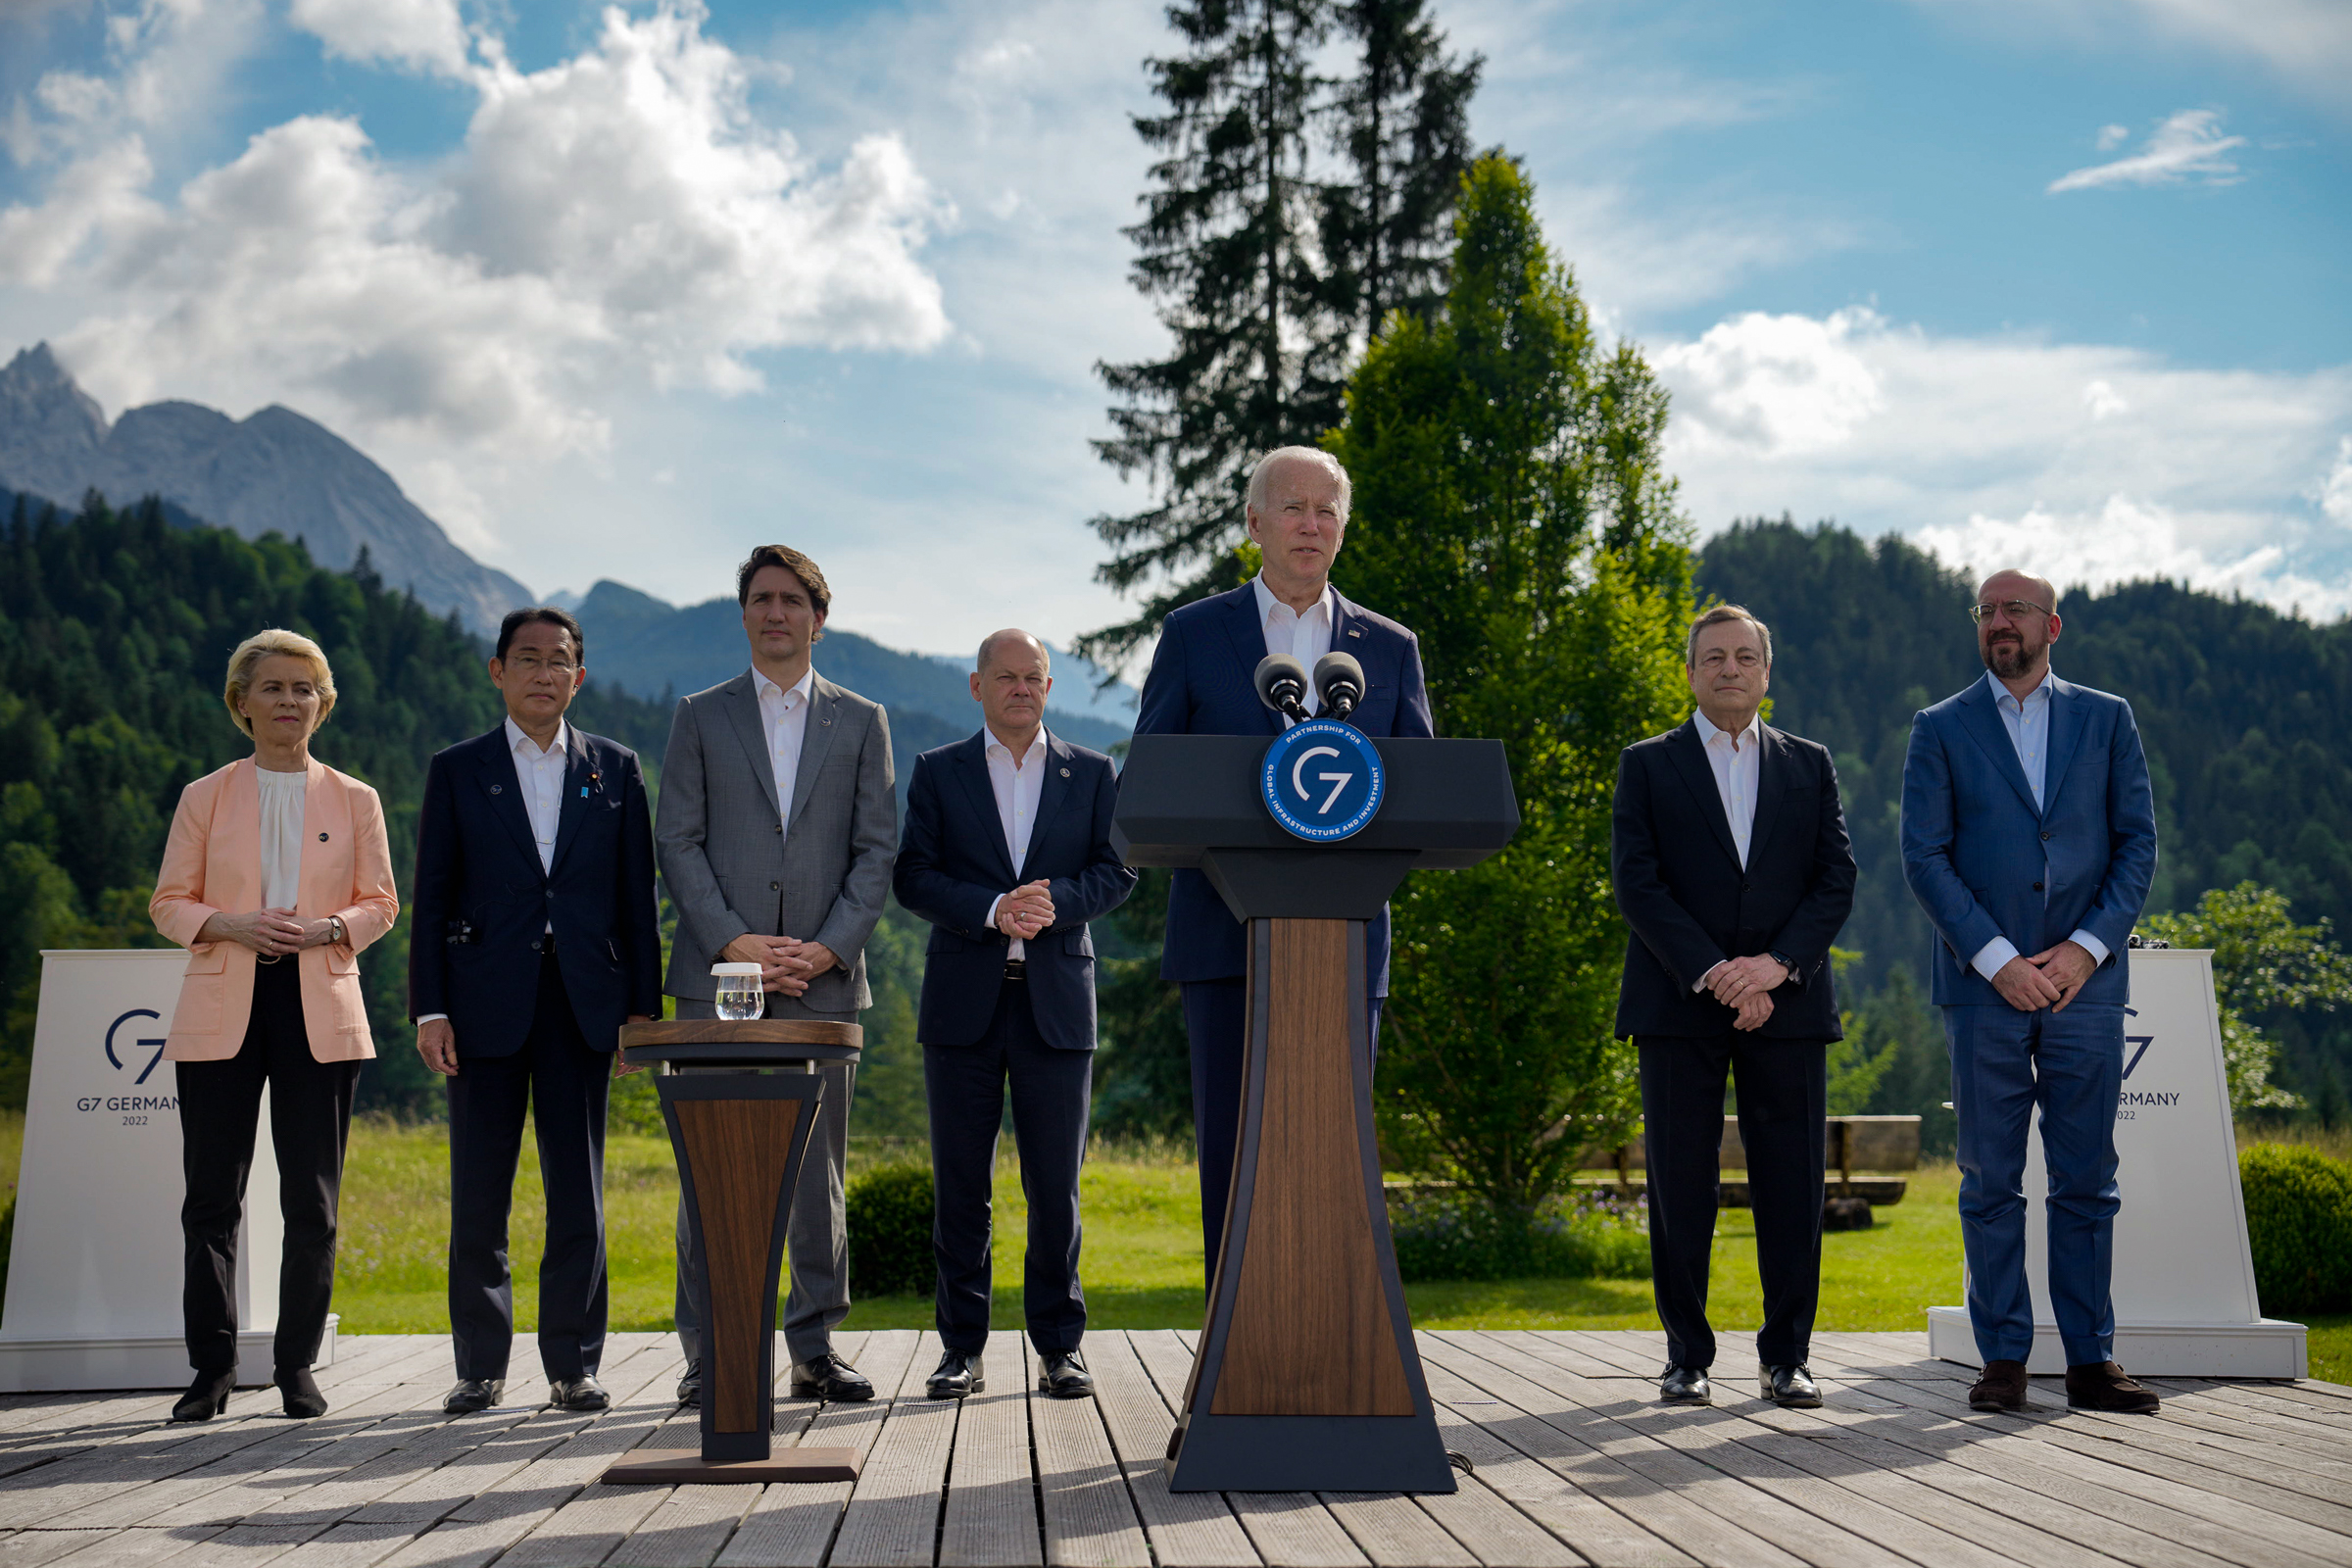 G7 Group Announces Sanctions To Clamp Down On Russia’s Gold